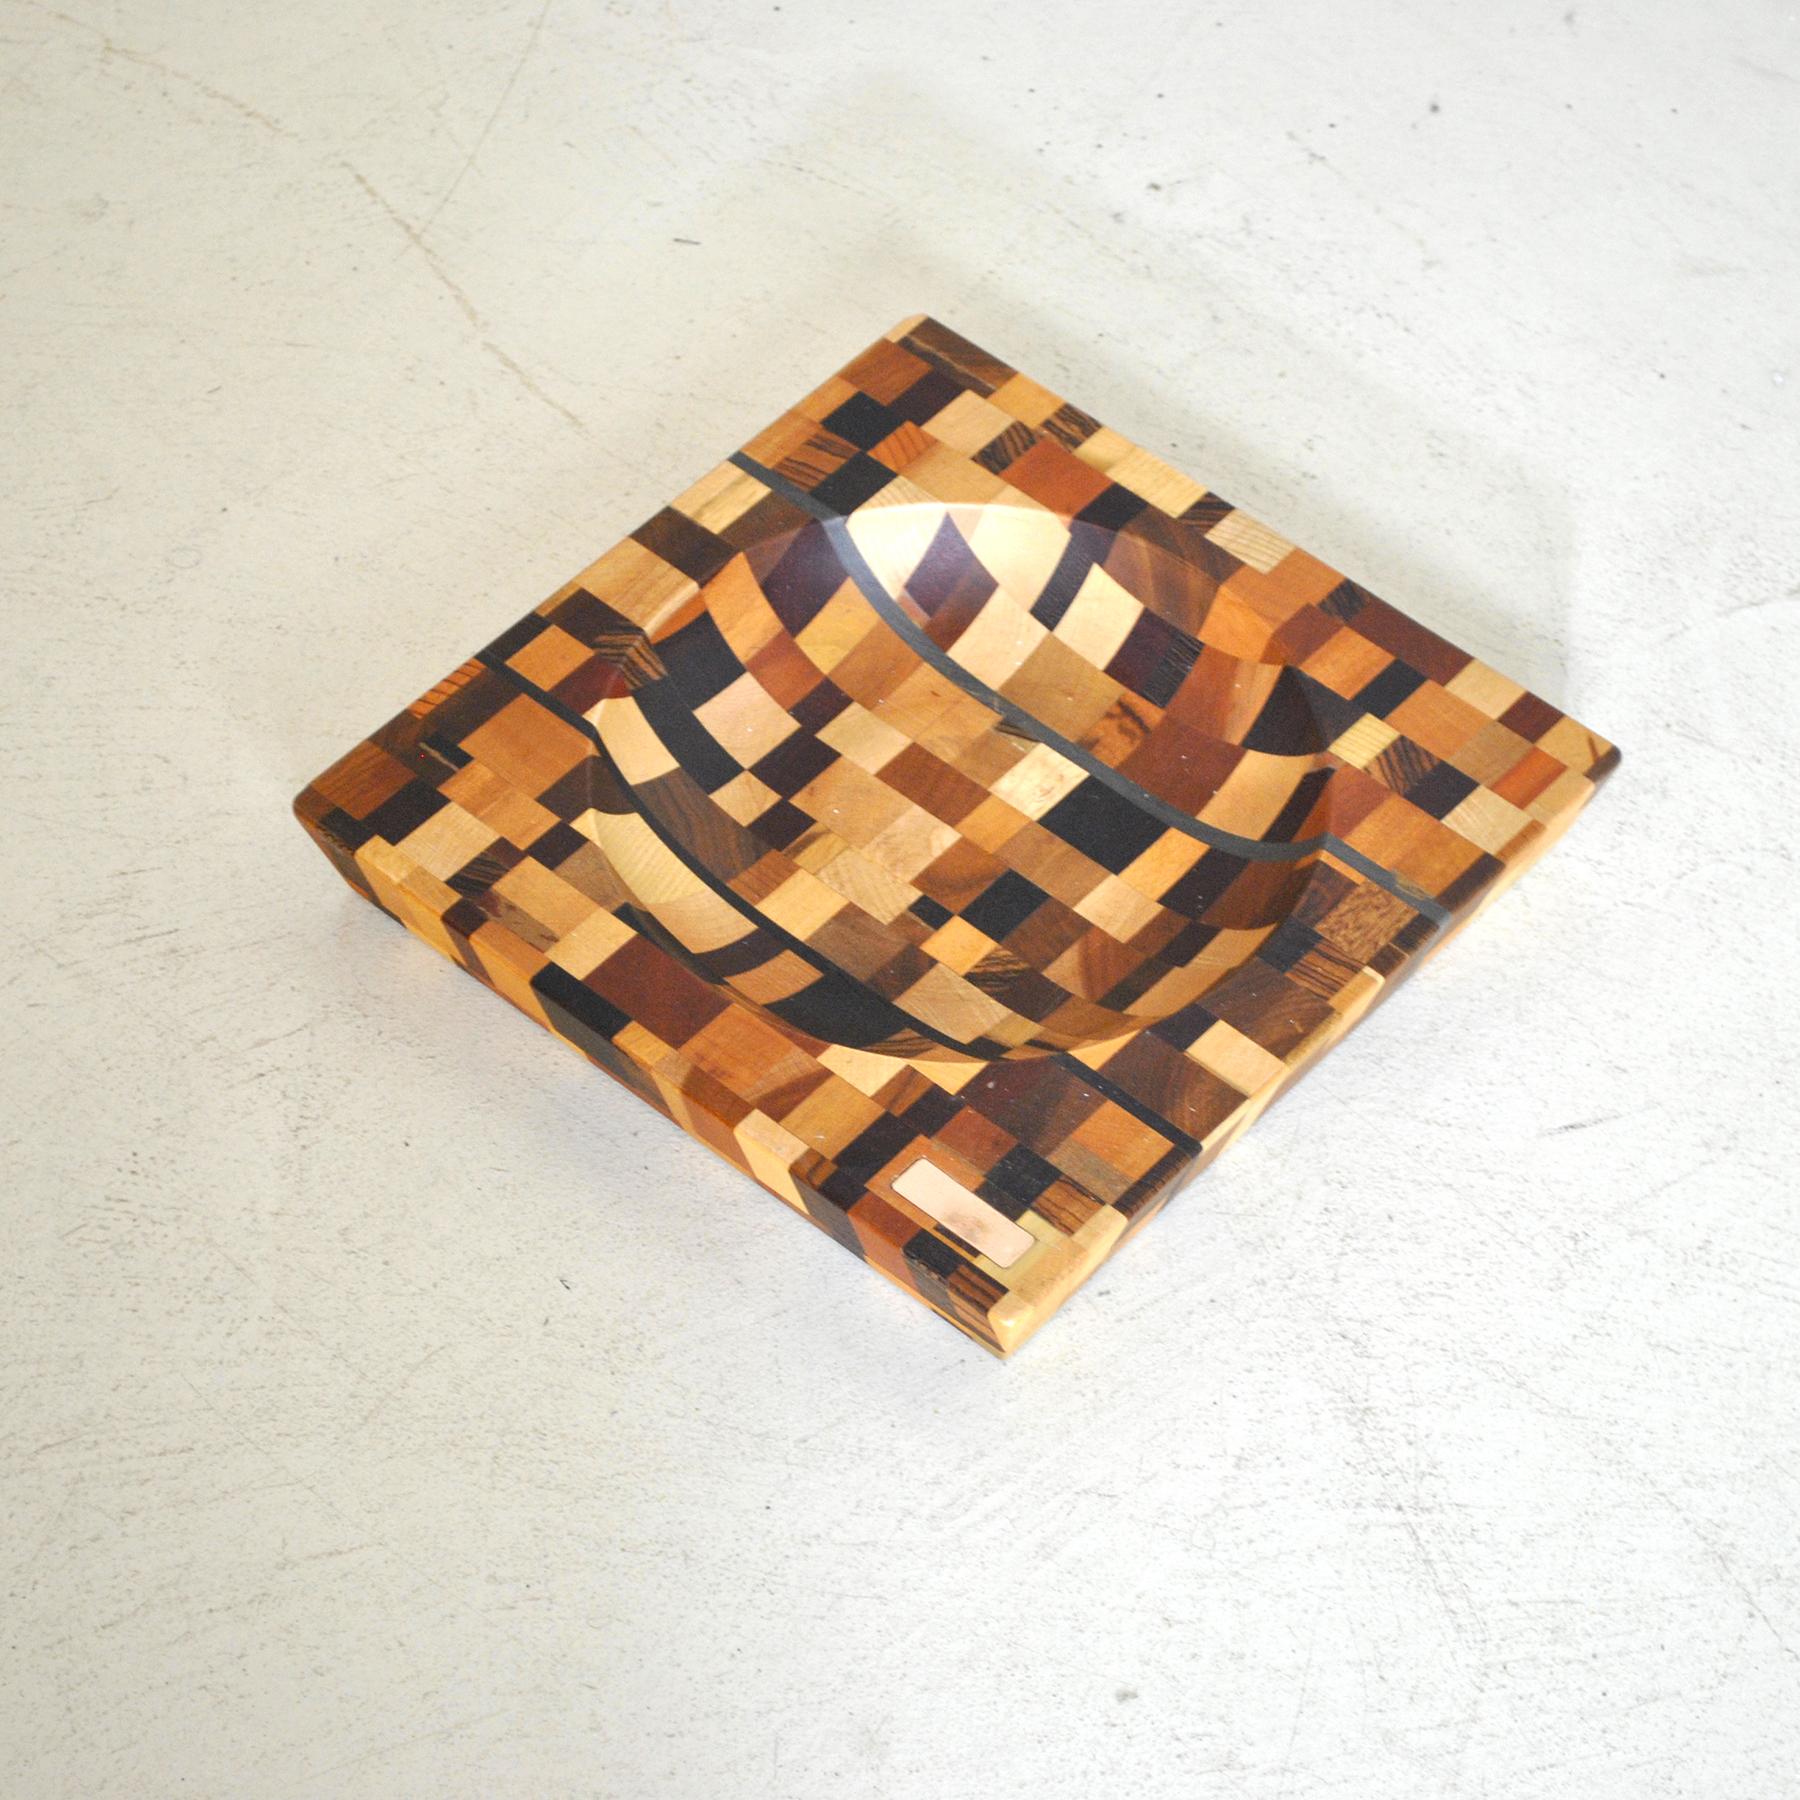 Late 20th Century Empty Pockets in Wooden Mosaic from the 70's